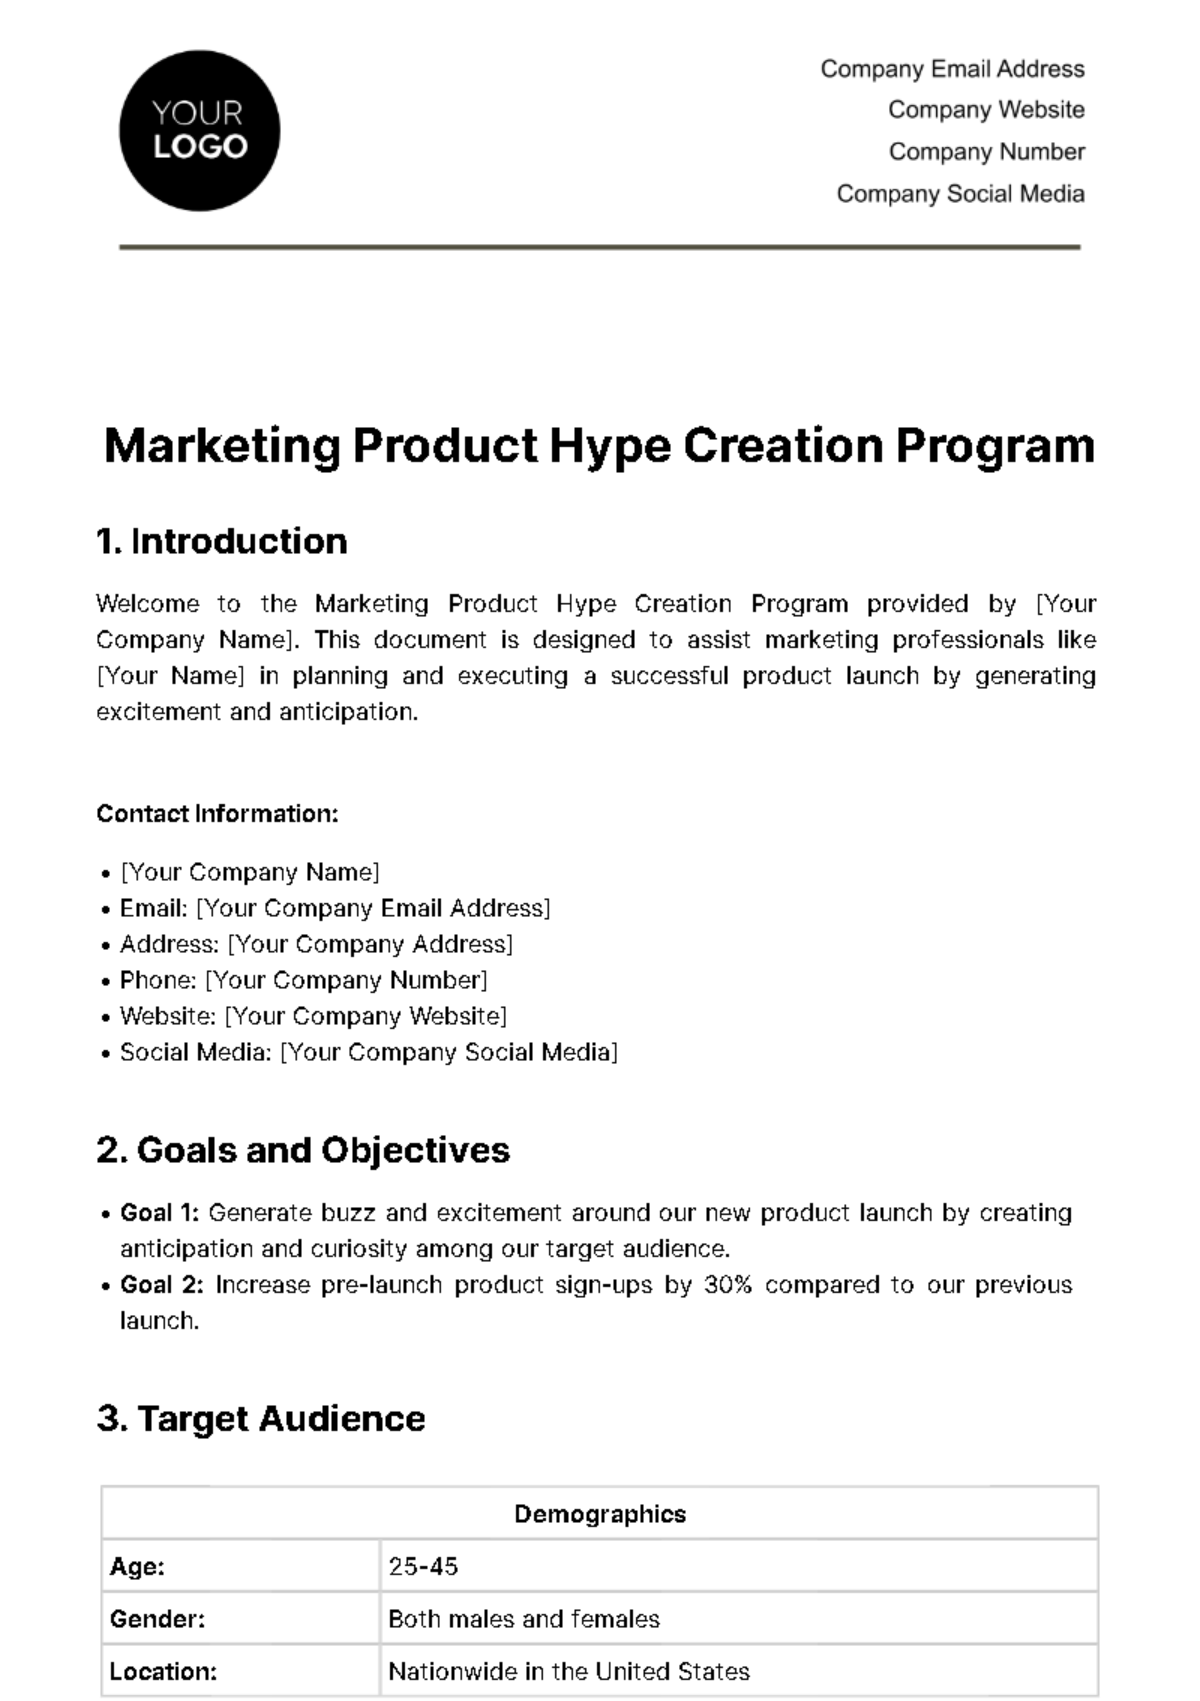 Free Marketing Product Hype Creation Program Template